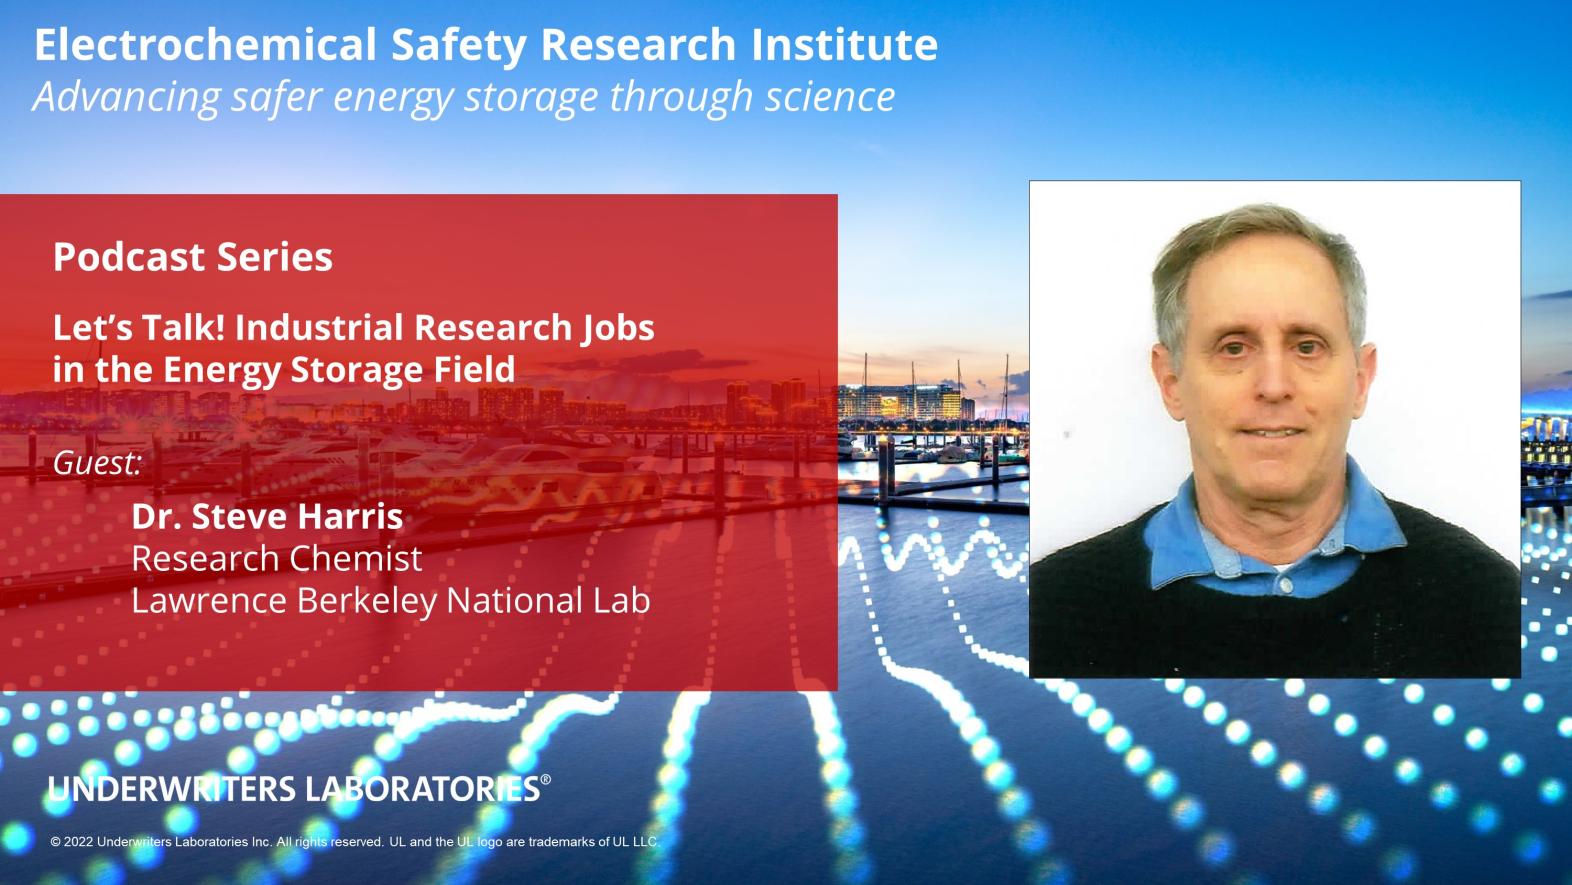 Let's Talk Episode 5, Industrial Research Jobs in the Energy Storage Field, with Dr. Steve Harris